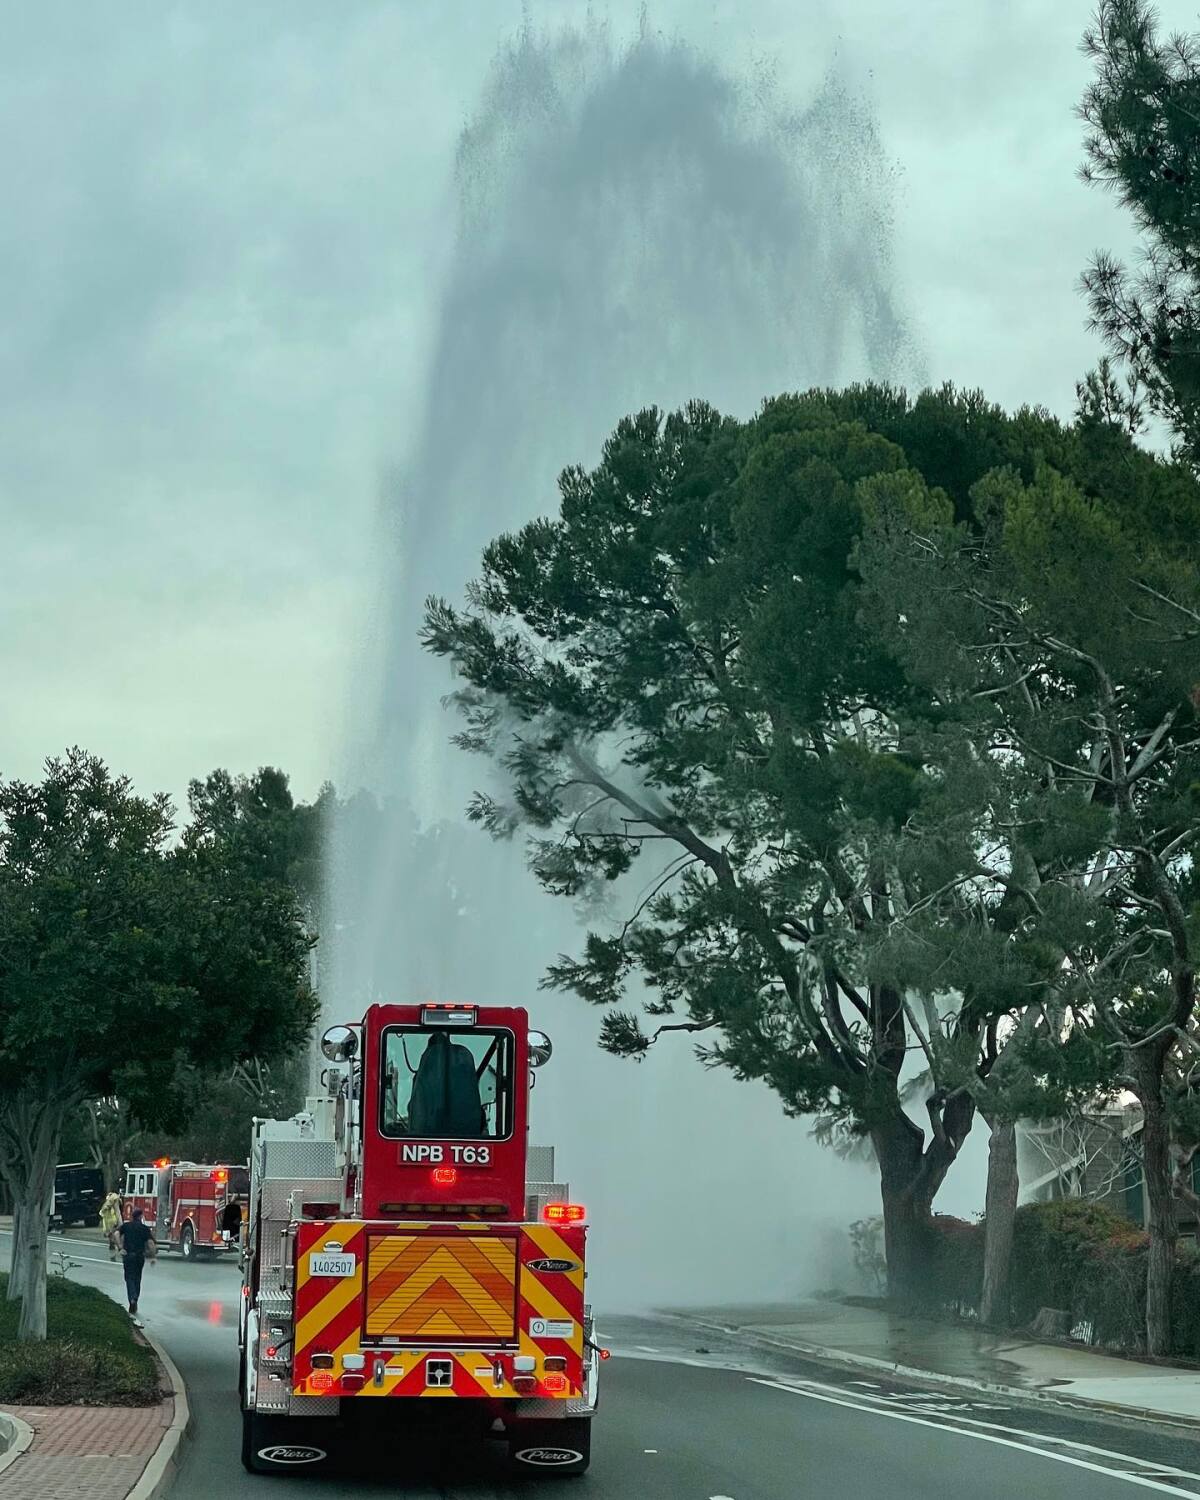 Newport Beach fire engines responded to a call about a sheered fire hydrant.